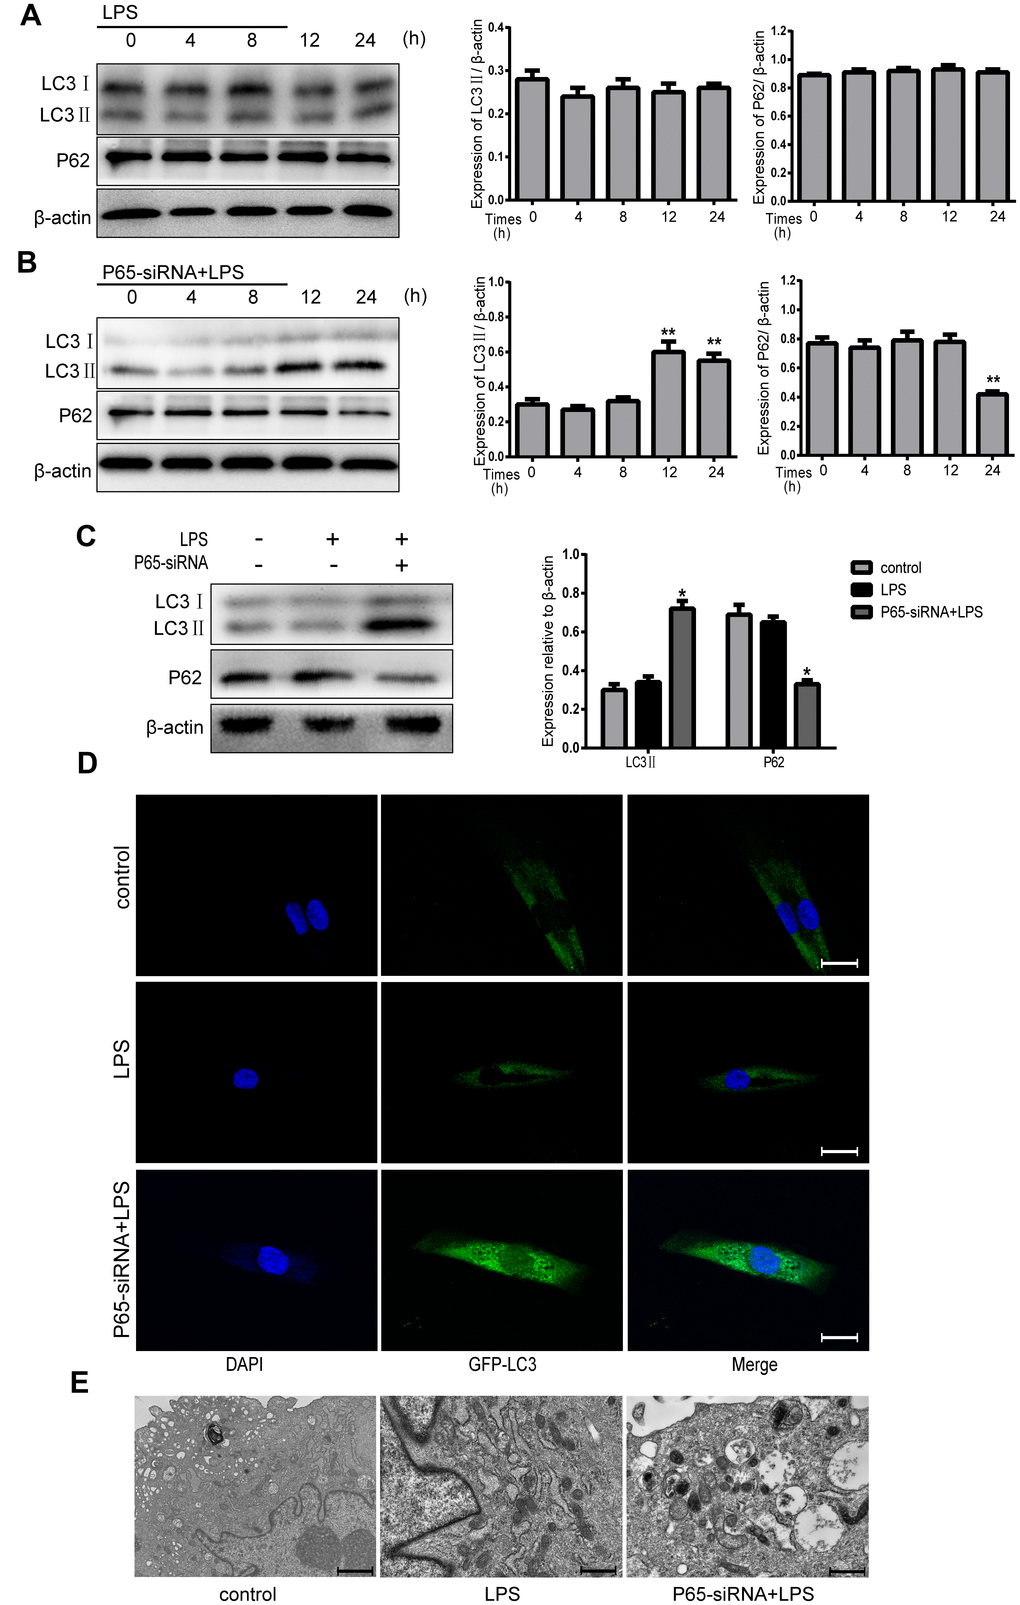 Inhibiting NF-κB promotes autophagy in LPS-induced NPCs. (A) After treatment with LPS for 4-24 h, the protein expression levels of LC3 II and P62 were measured by western blot. (B) After treatment with LPS plus p65-siRNA for 4-24 h, the protein expression levels of LC3 II and P62 were measured by western blot. (C) Western blot analysis for the protein expression levels of LC3 II and P62 after various treatment for 24 h. (D) NPCs were transfected with adenovirus containing GFP-LC3 and the formation and distribution of GFP-LC3 punctate were observed under confocal microscopy (Amplification×800). (E) Morphological observation of autophagy under transmission electron microscope (magnification ×30,000). Values are means ±SEM.*p#p